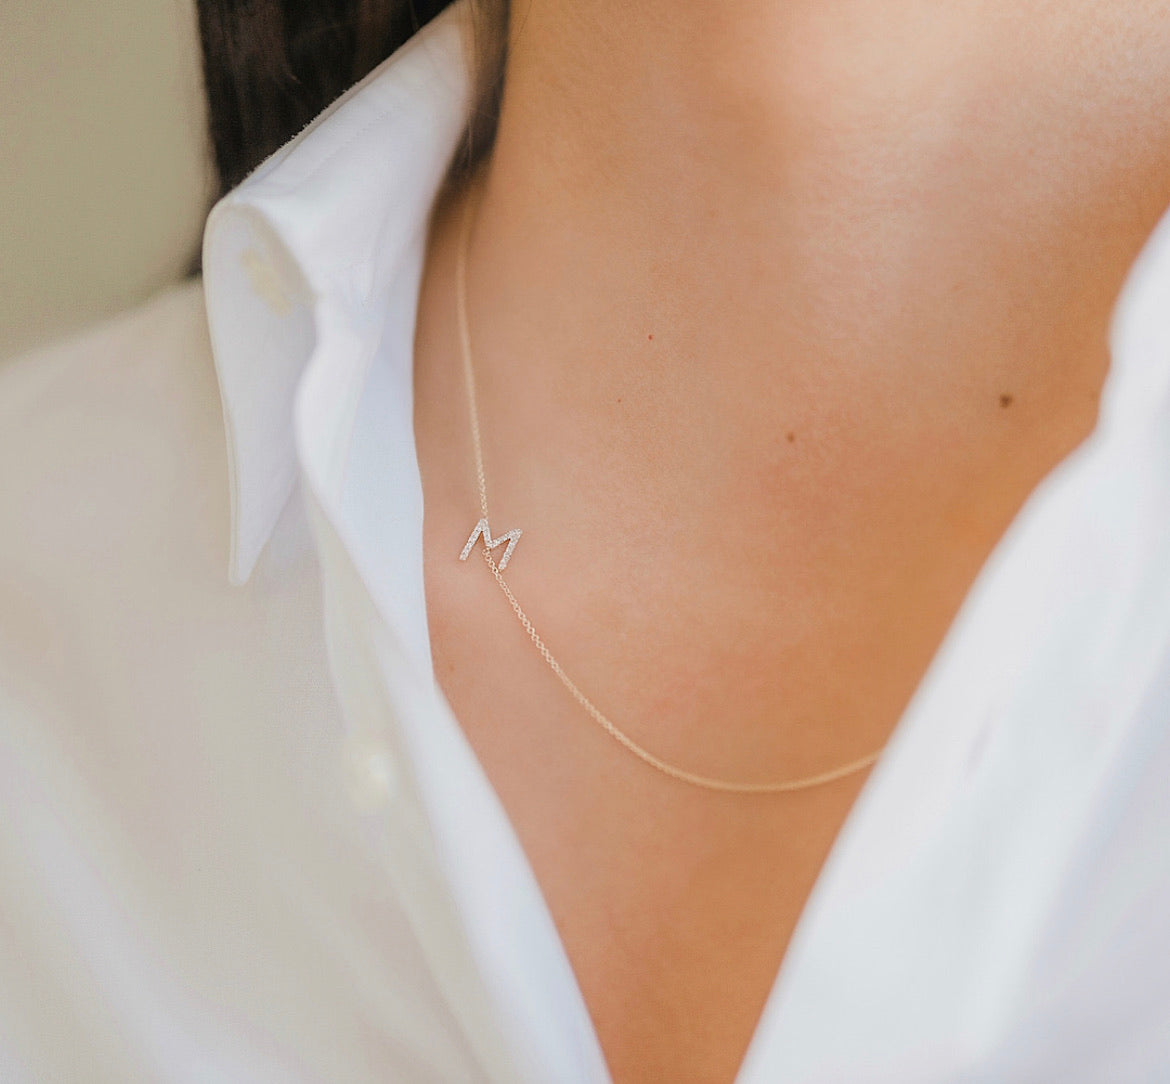 ASYMMETRICAL INITIAL NECKLACE